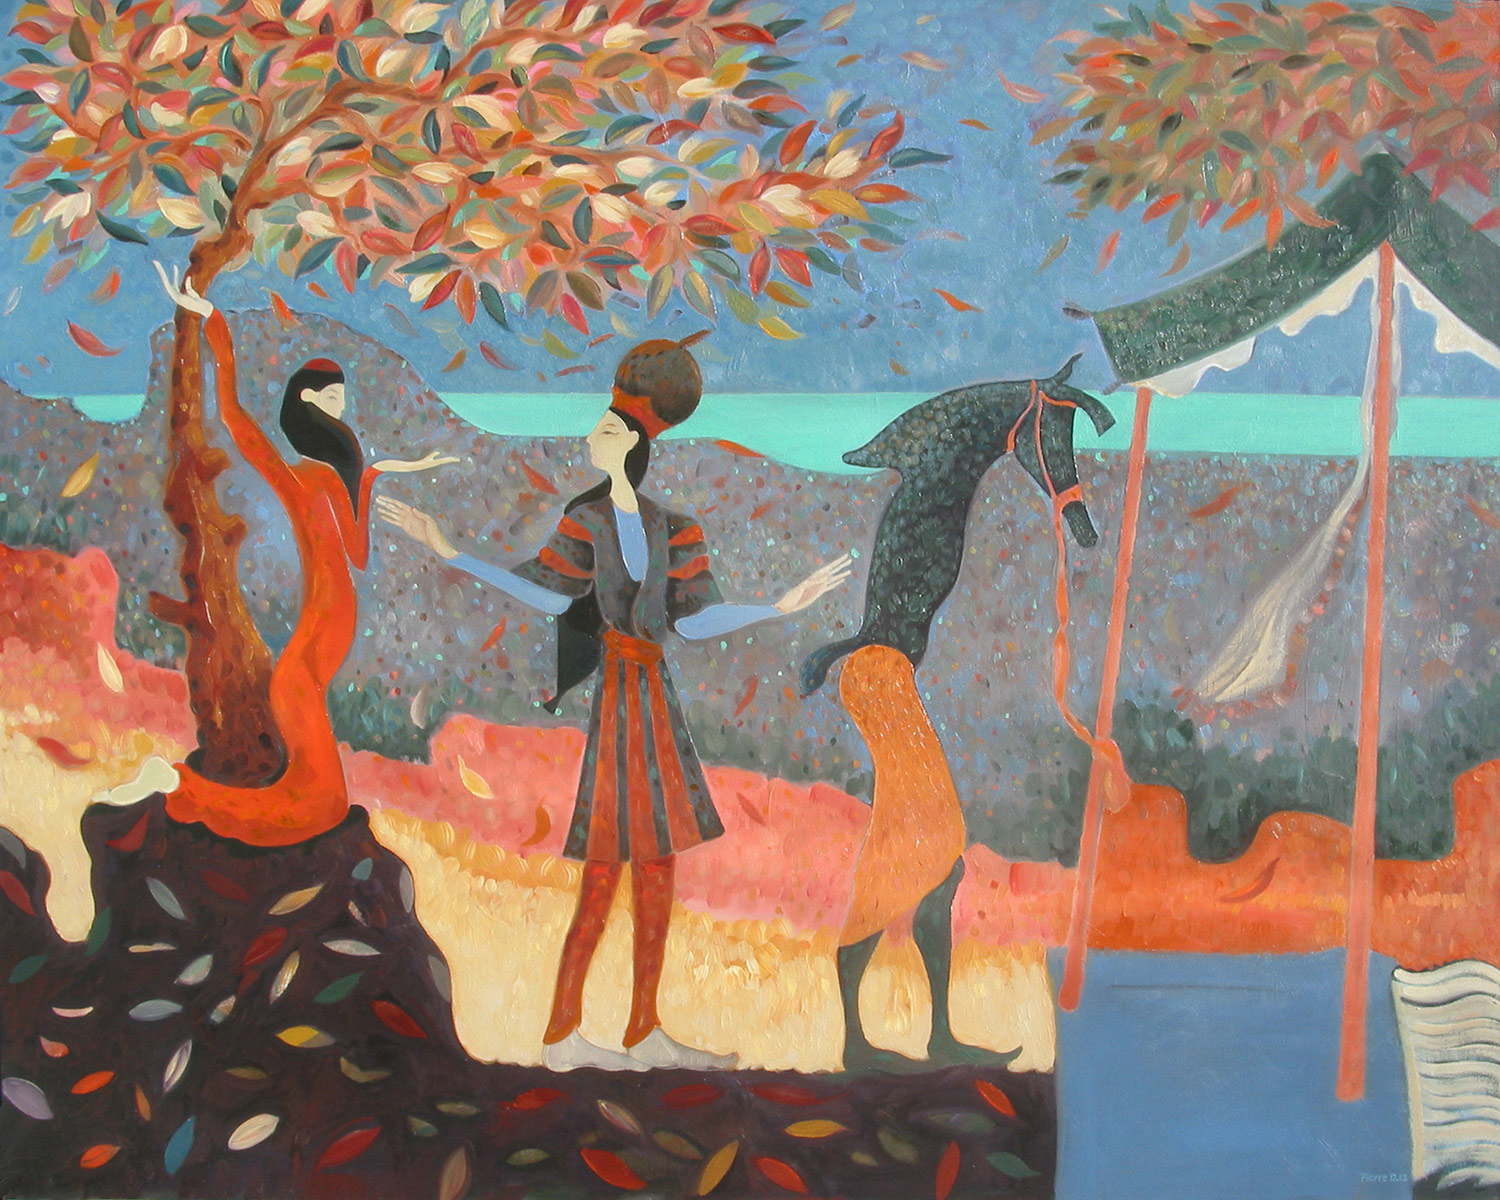  The Travelling Players &nbsp; ©  Oil on canvas  120 cm high x 150 cm wide 